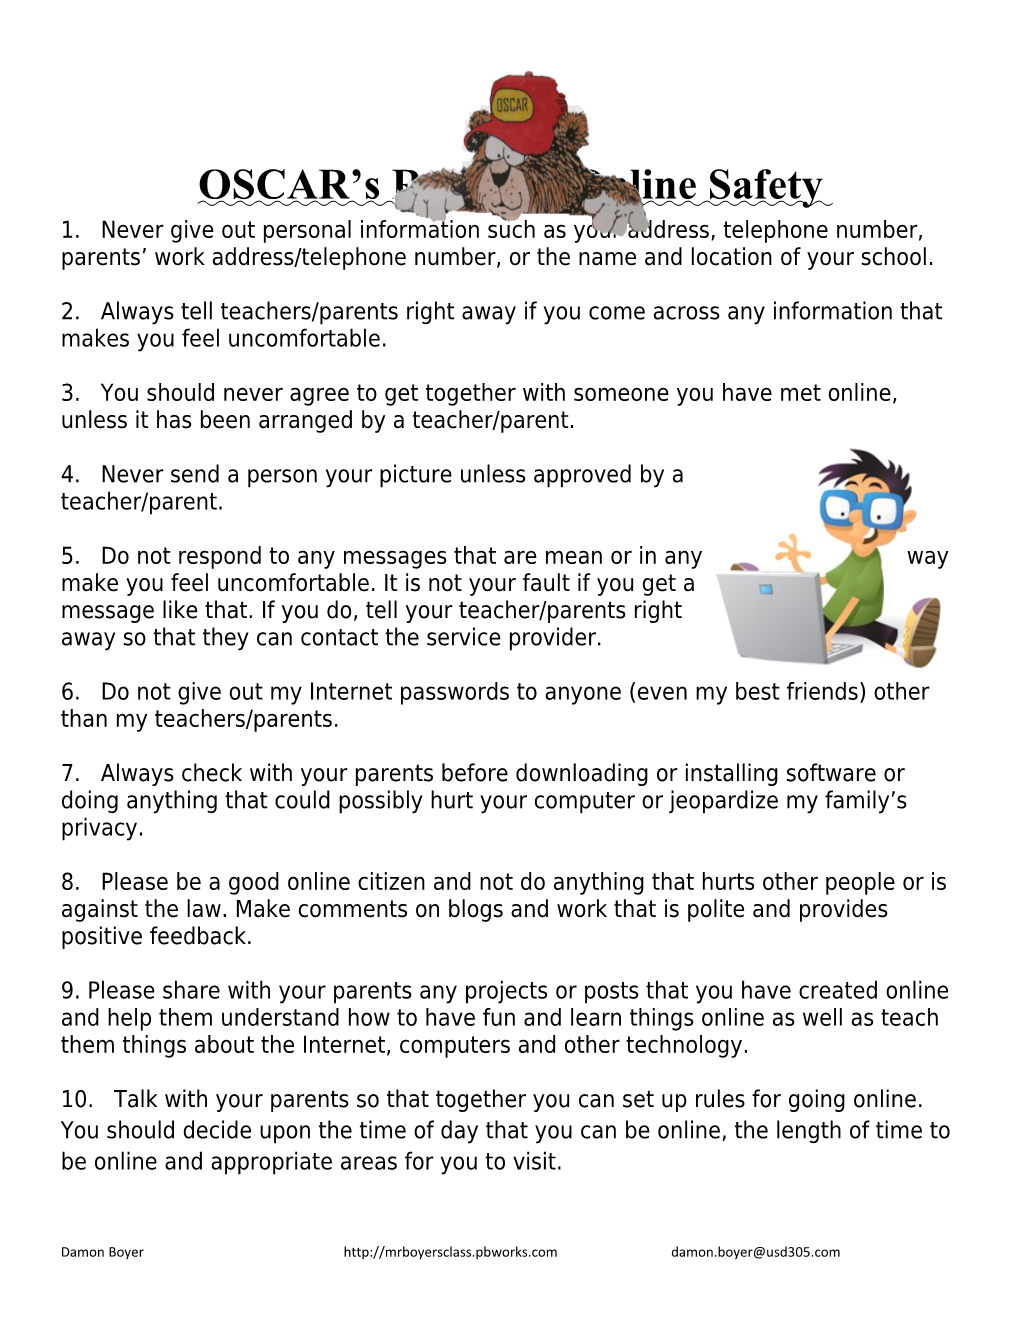 OSCAR S Rules for Online Safety